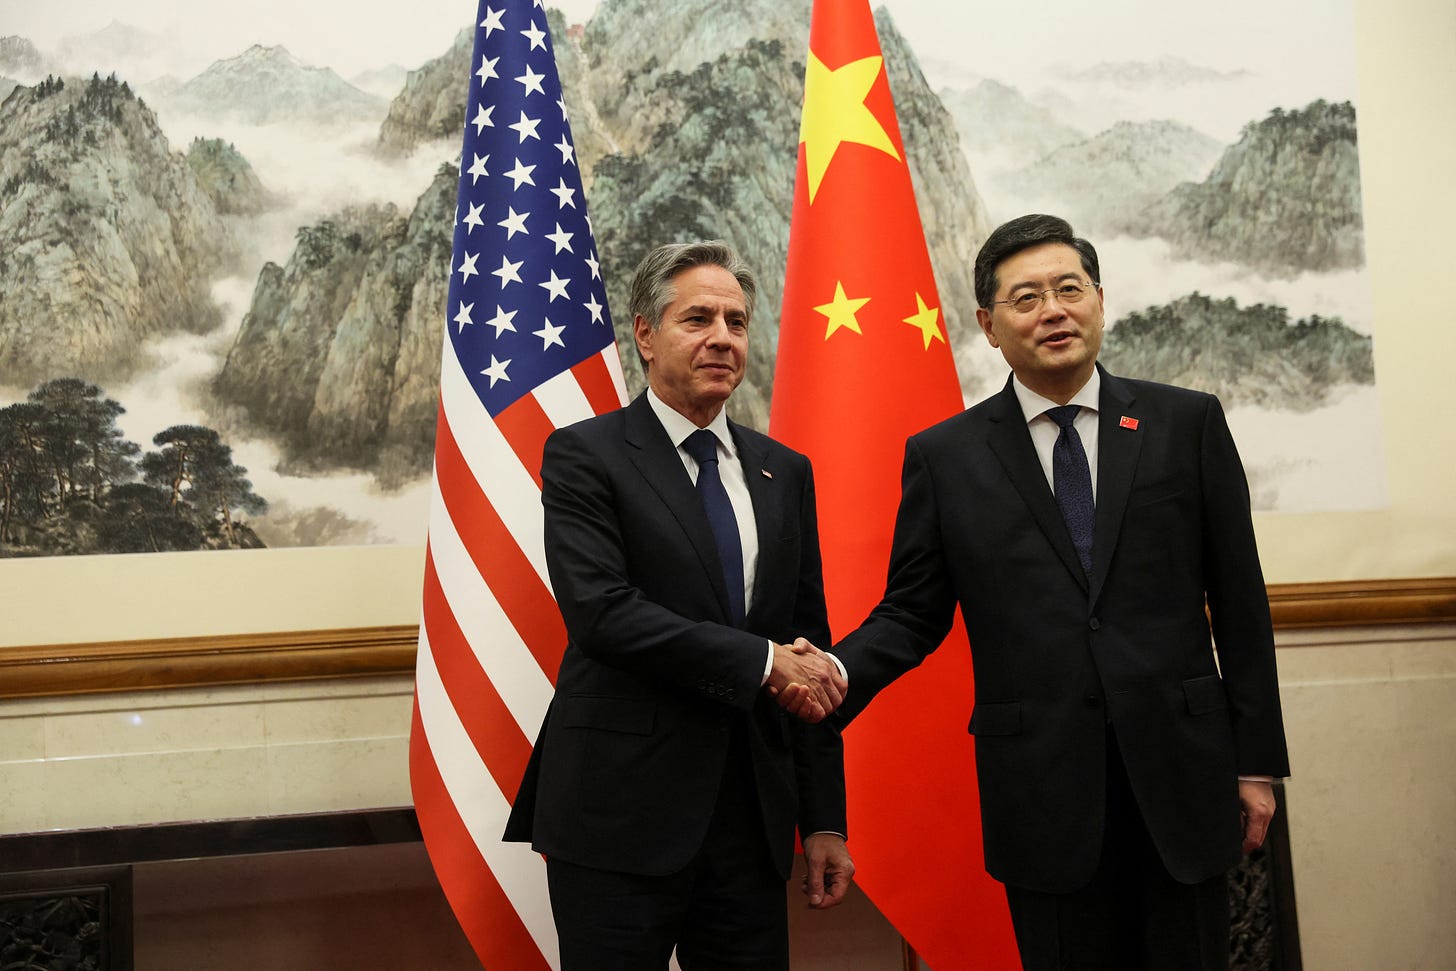 Blinken, Qin hold 'candid' talks, US and China agree to meet again | Reuters